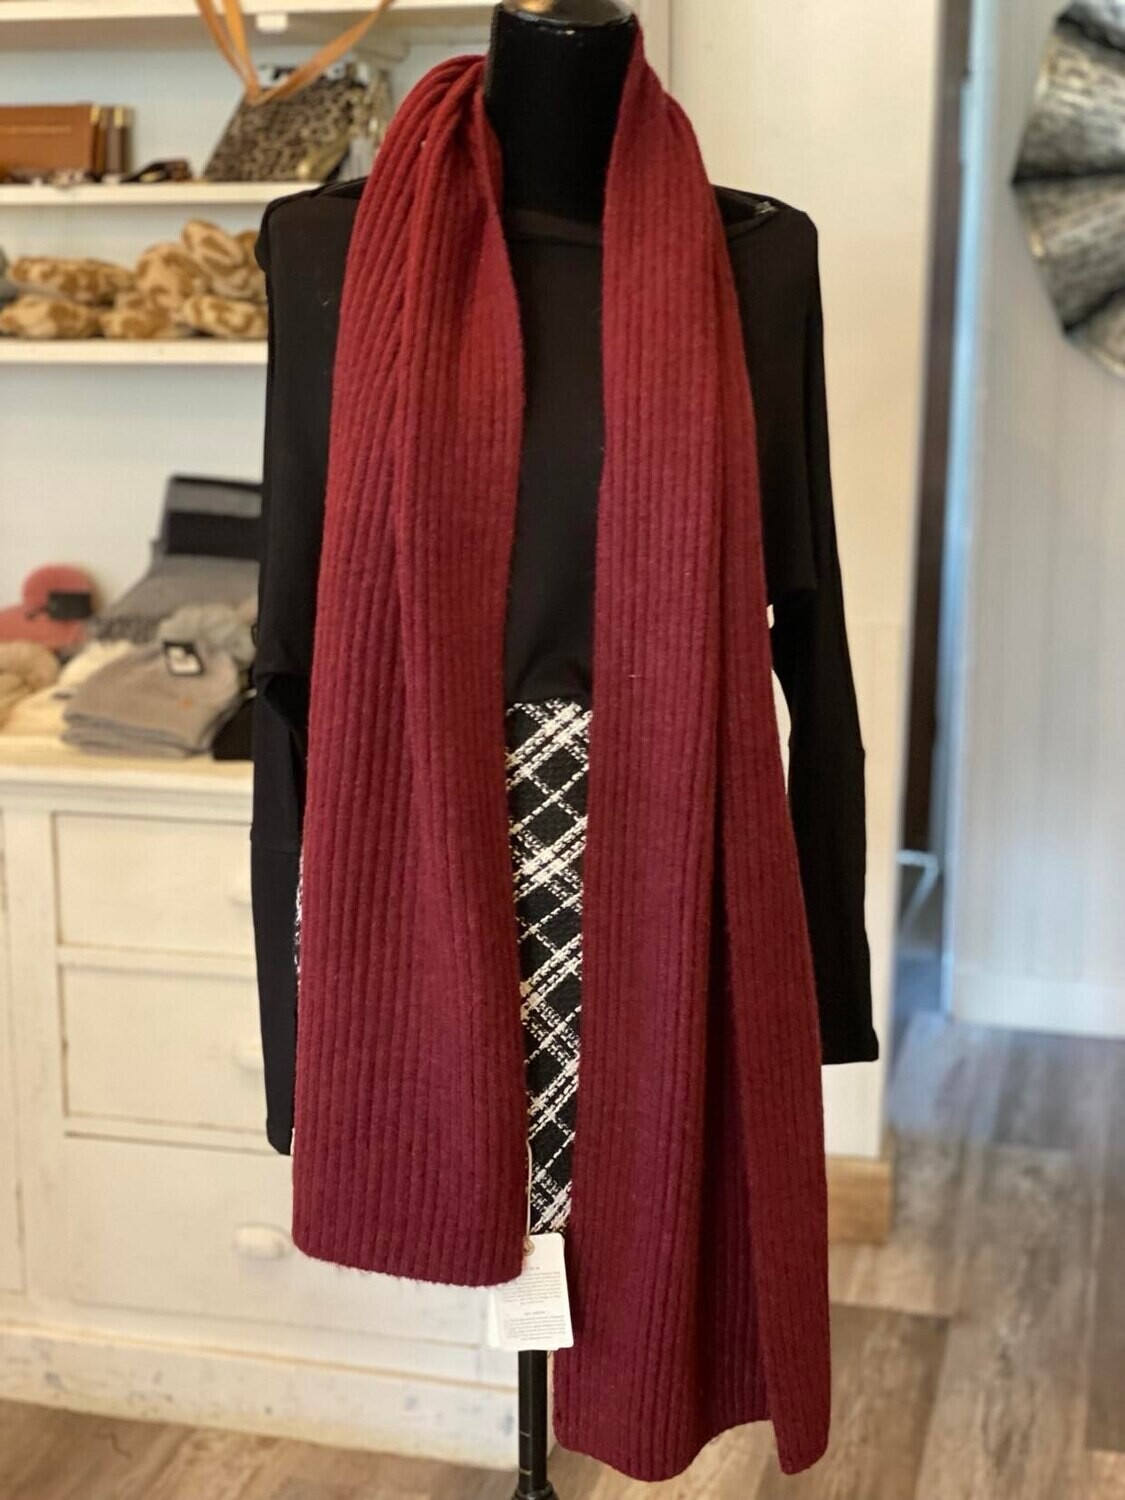 Maroon Cablenet Scarf